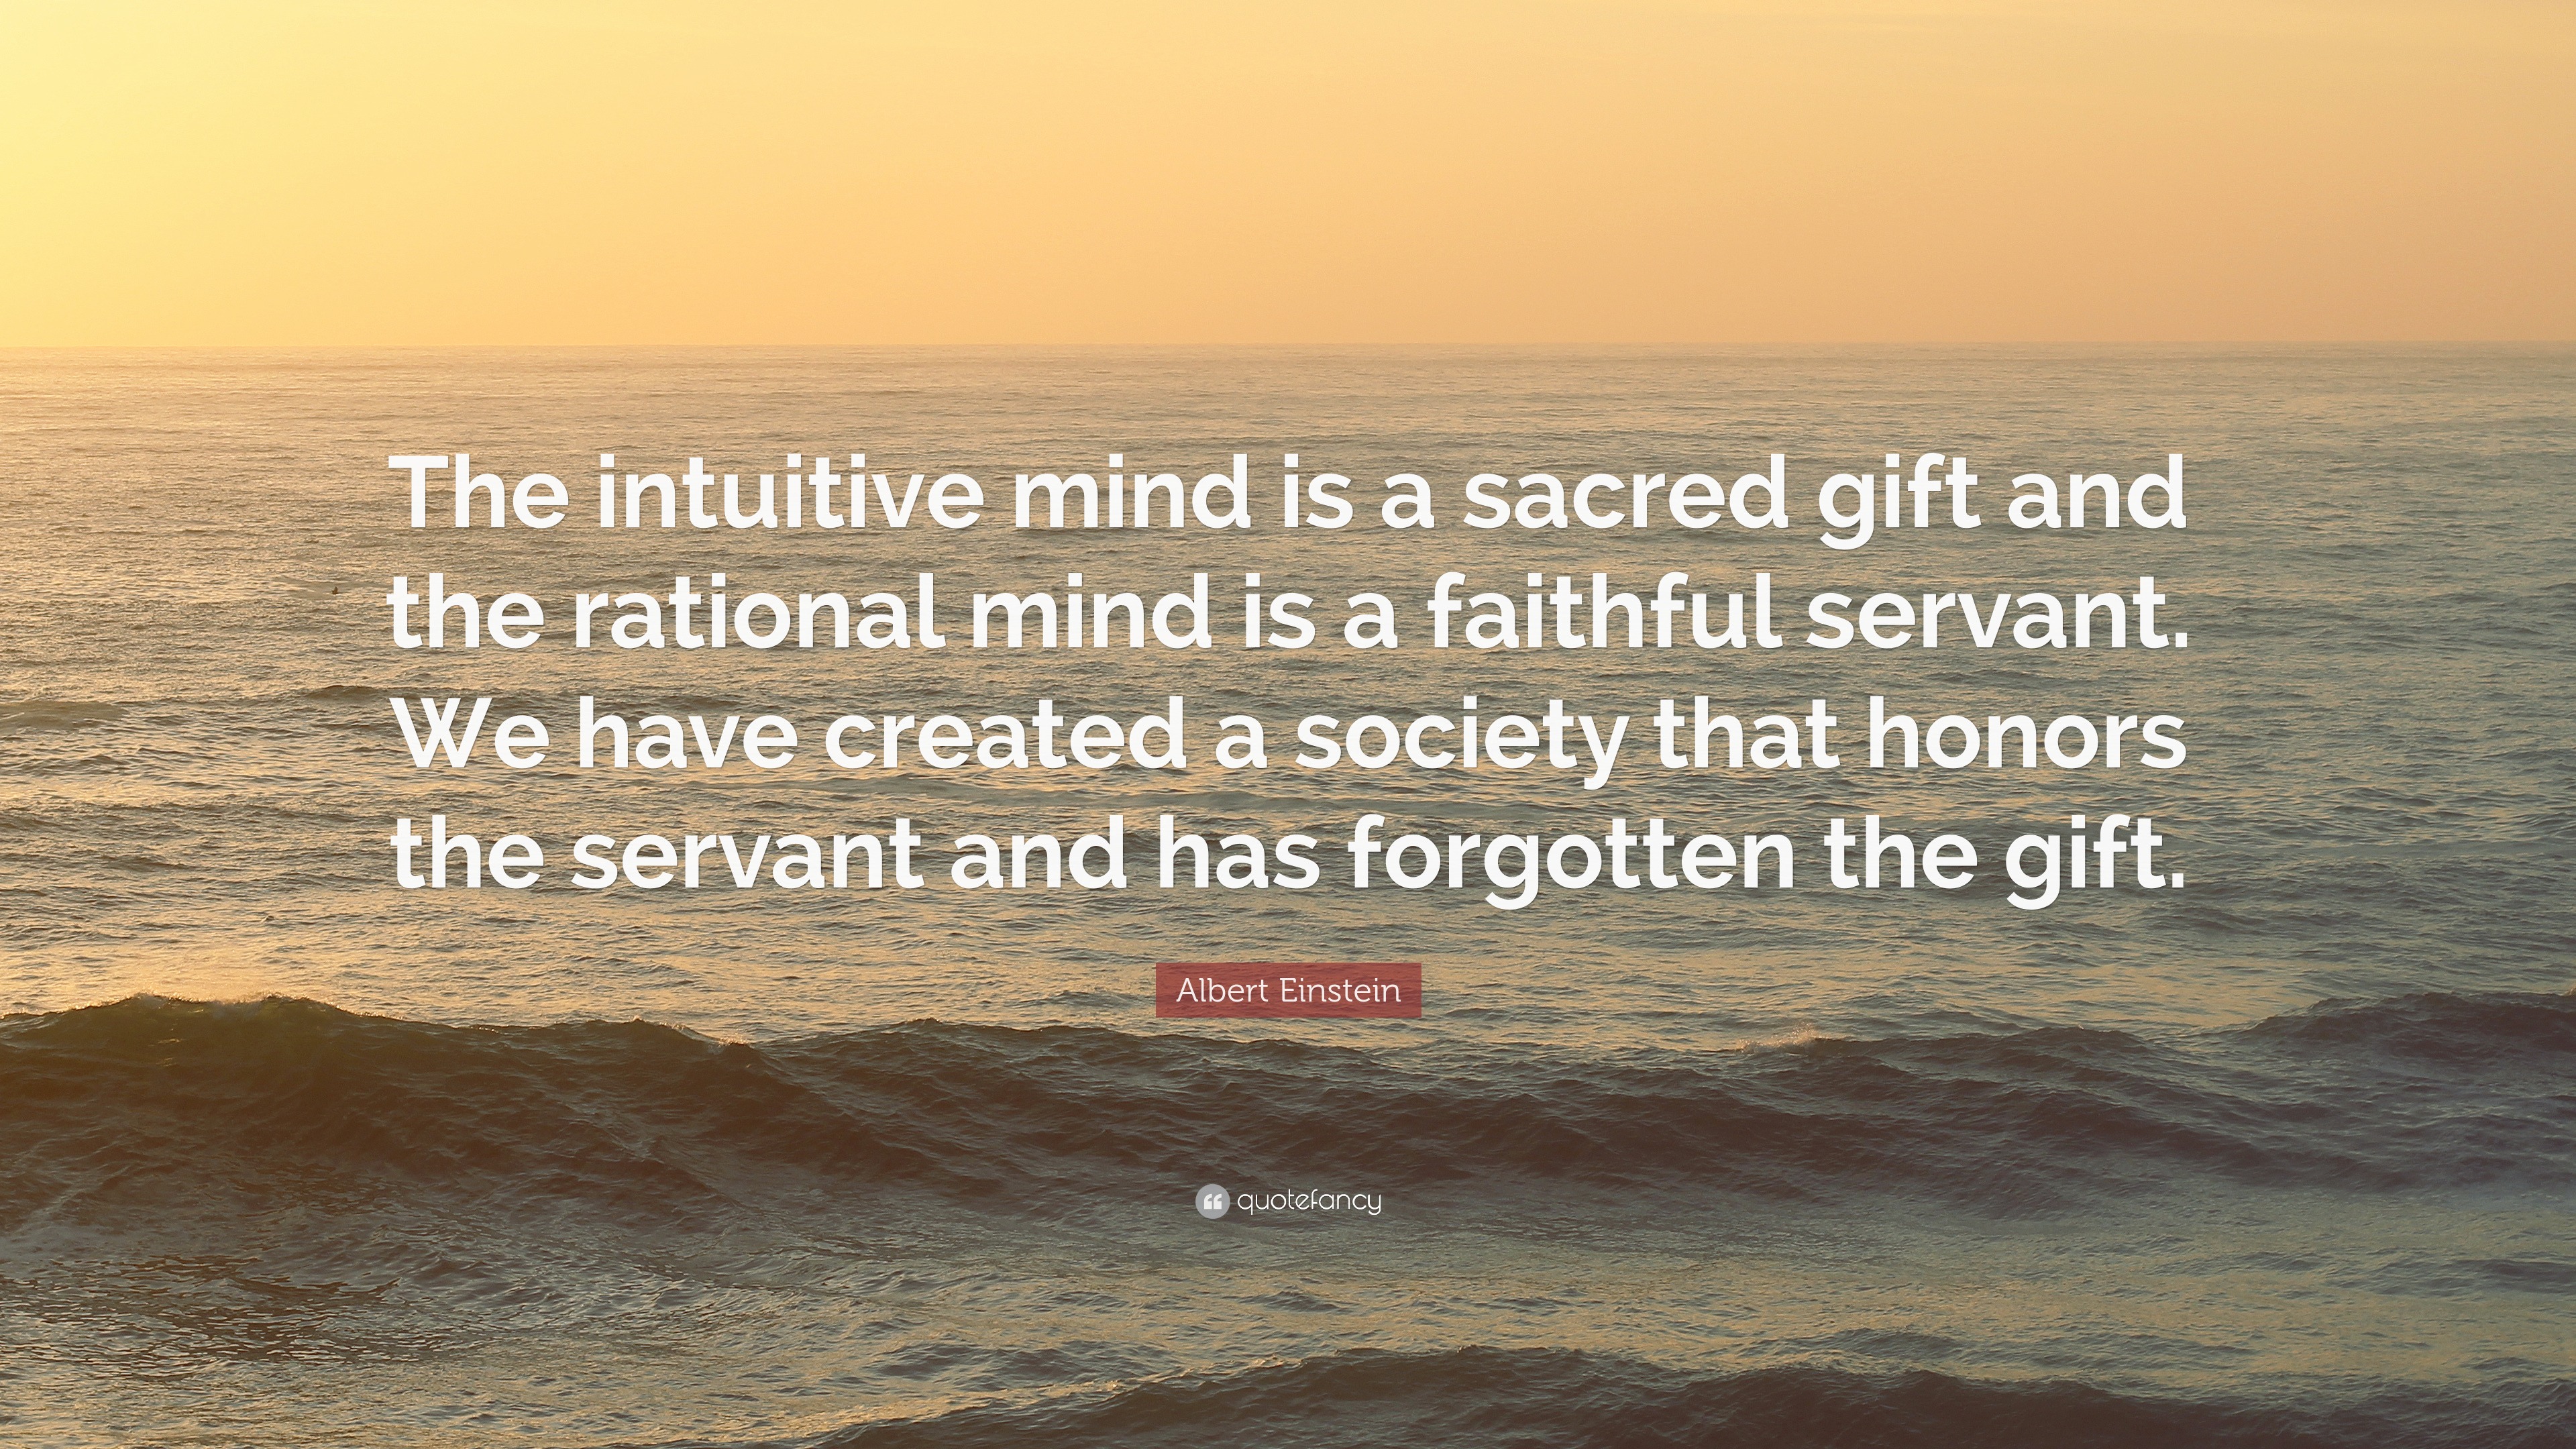 Albert Einstein Quote “The intuitive mind is a sacred gift and the